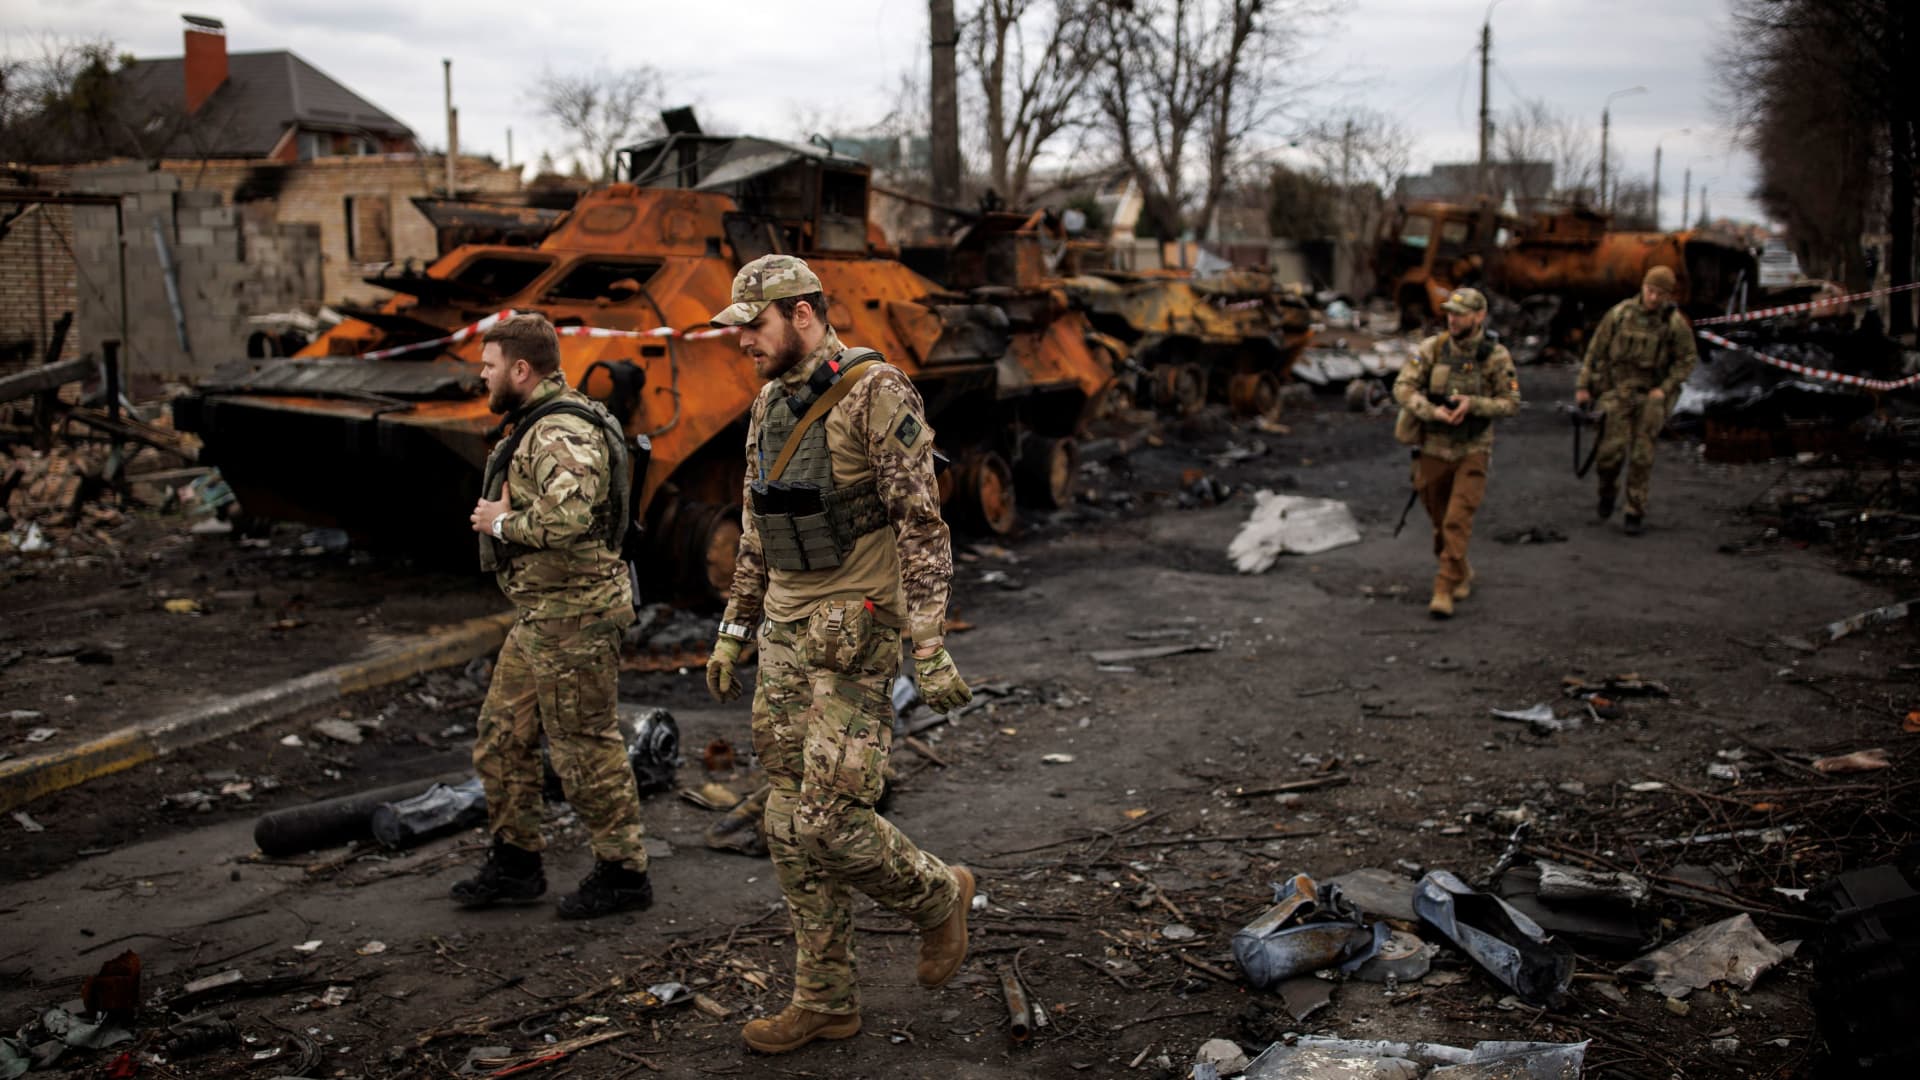 Desperate Ukraine tells U.S. ‘bureaucracy’ is no excuse for failing to provide critical weapons and ammunition